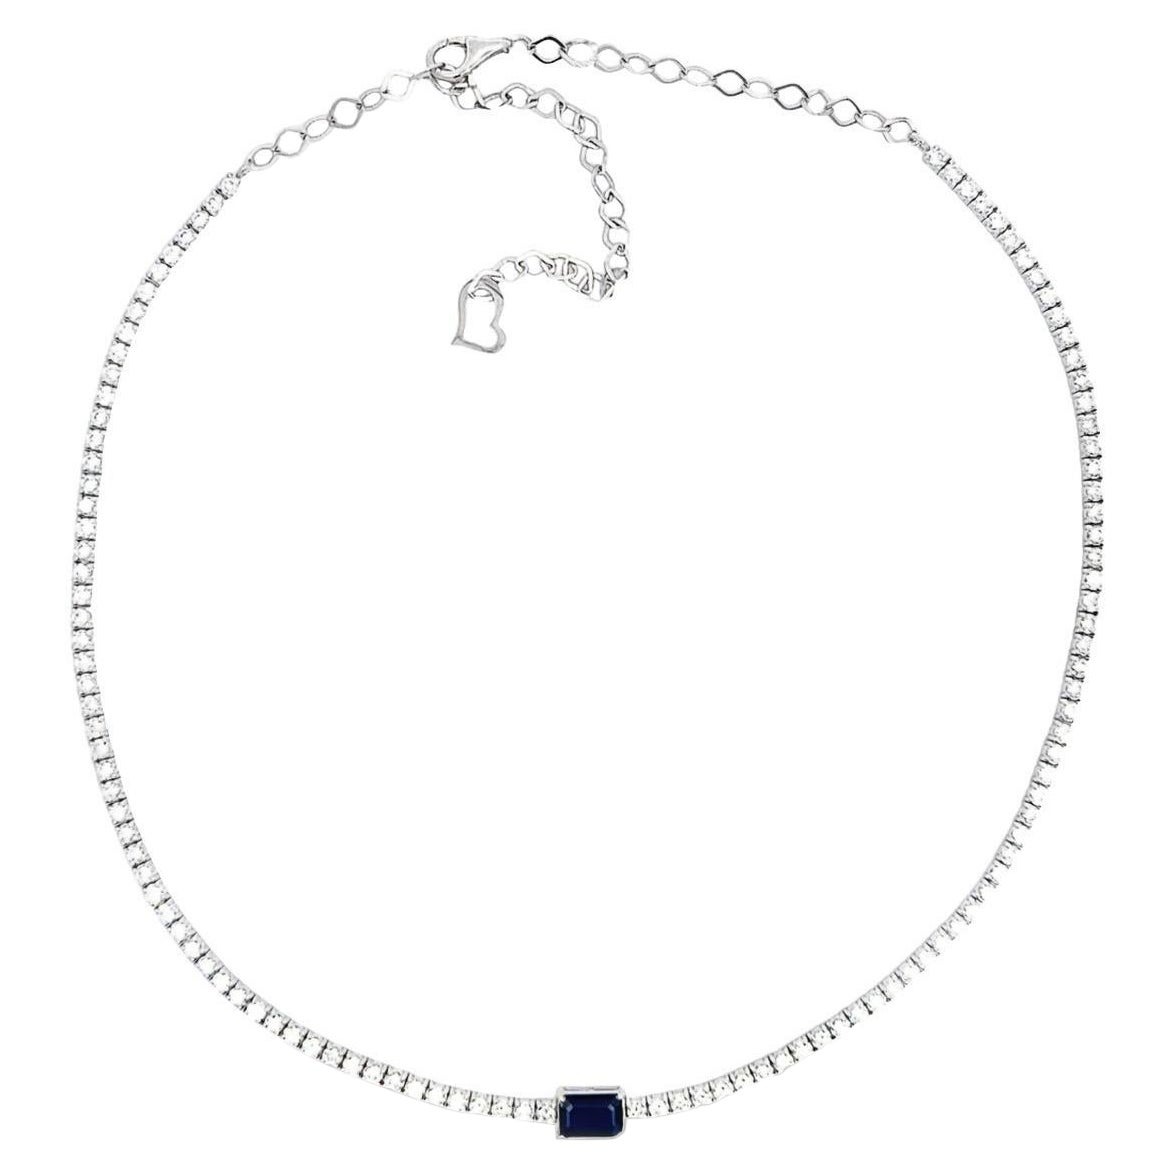 Diamond Choker Necklace in 14k white with 1.02ct of Natural Emerald Cut Sapphire